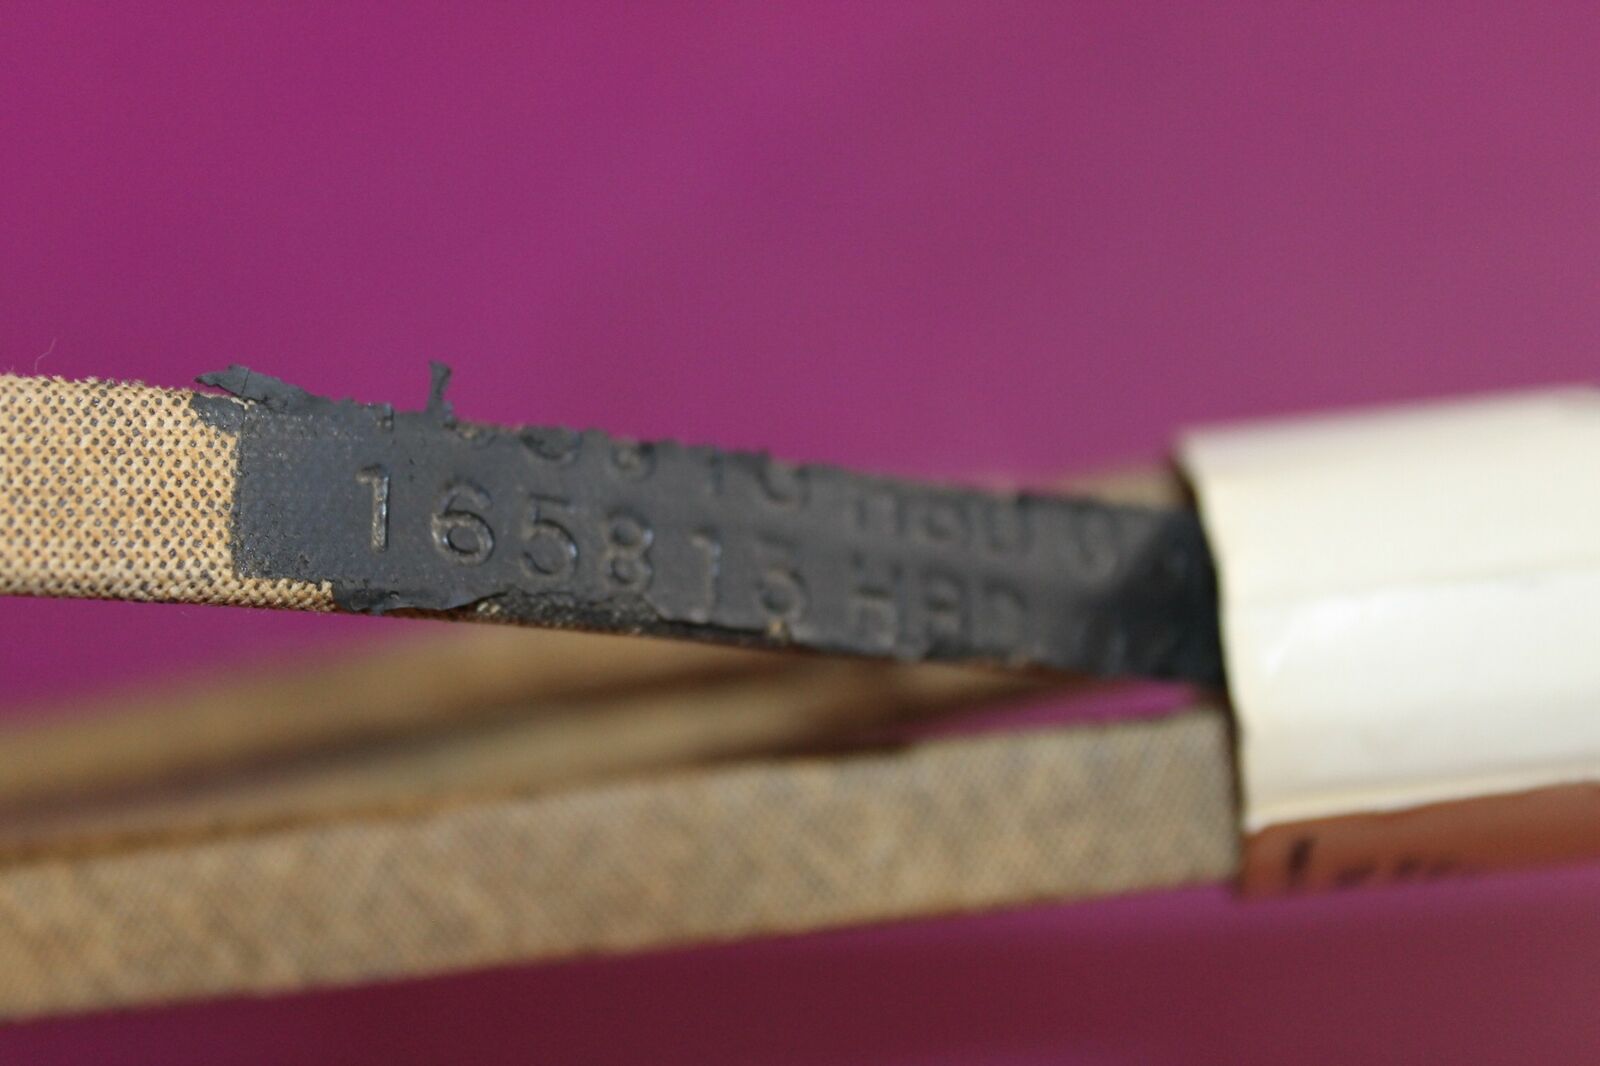 NOS Mower Belt marked 165813. Acquired from a closed dealership. See pic.